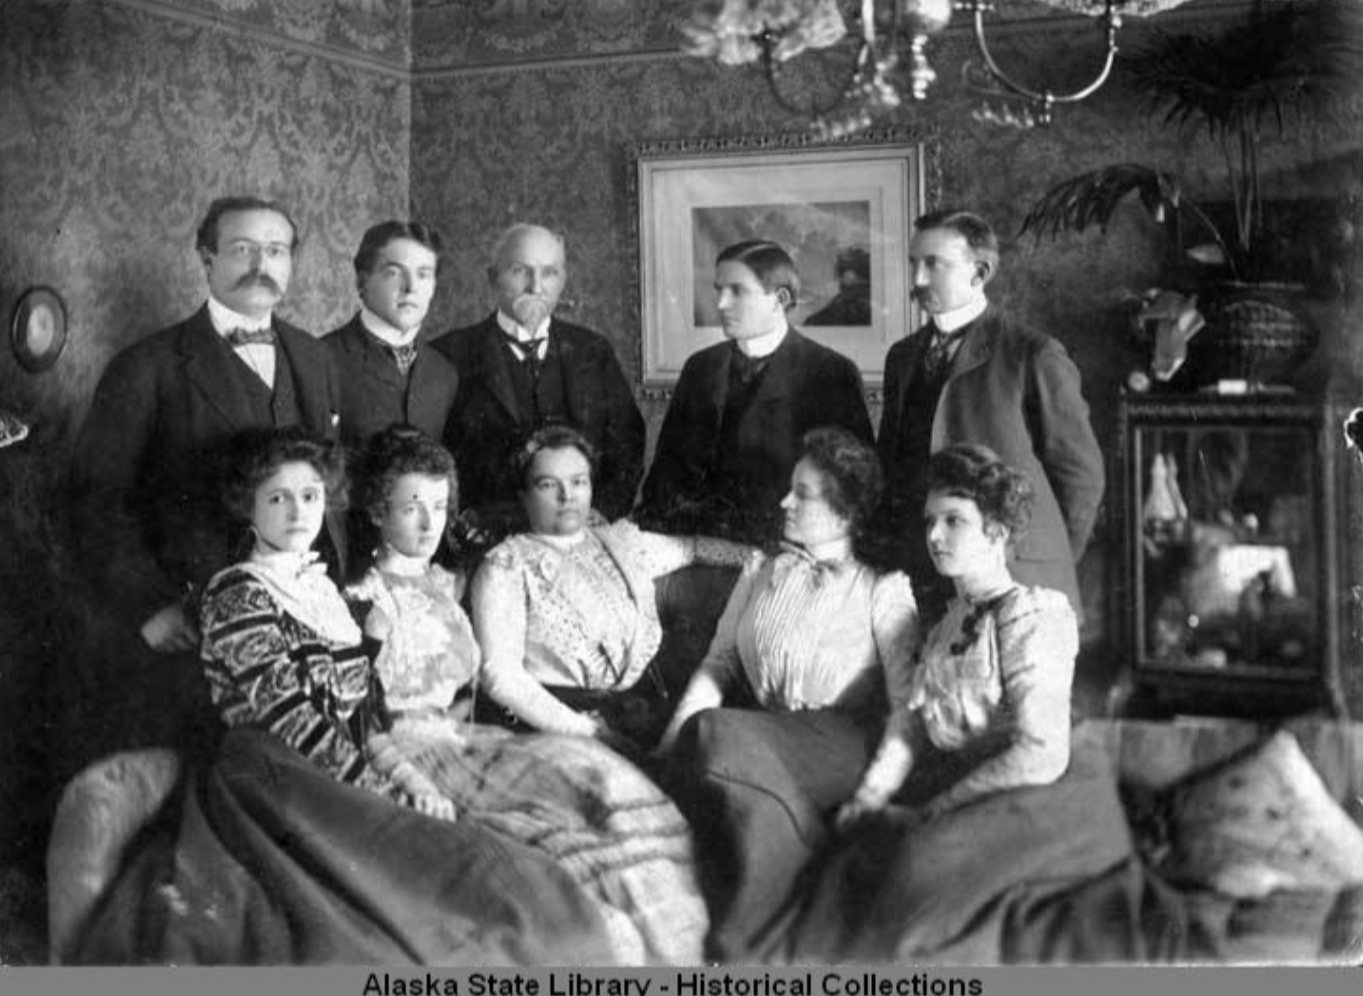 Photograph of members of the Noyes Family. Five men in suits stand behind five women in dresses sitting on couches and chairs. John Noyes with his long white beard is recognizable standing in the middle, presumably with his wife Elmira in front of him. The other four couples are their children and spouses. All are white.